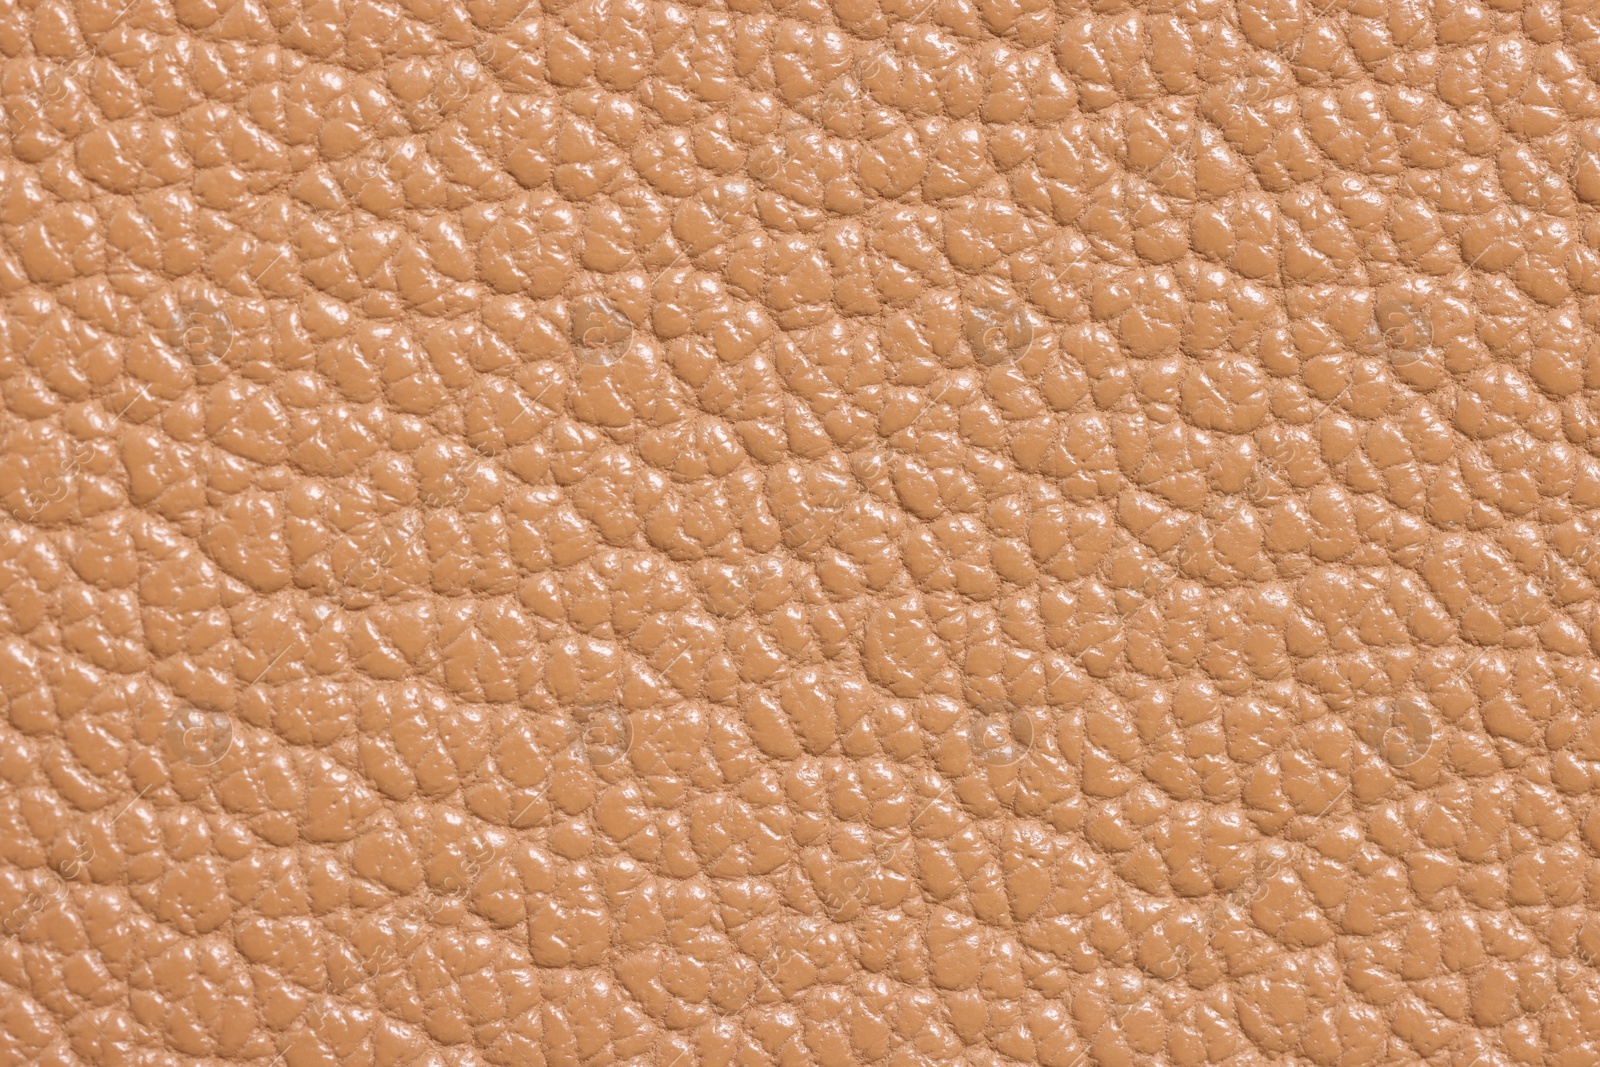 Photo of Light brown natural leather as background, top view